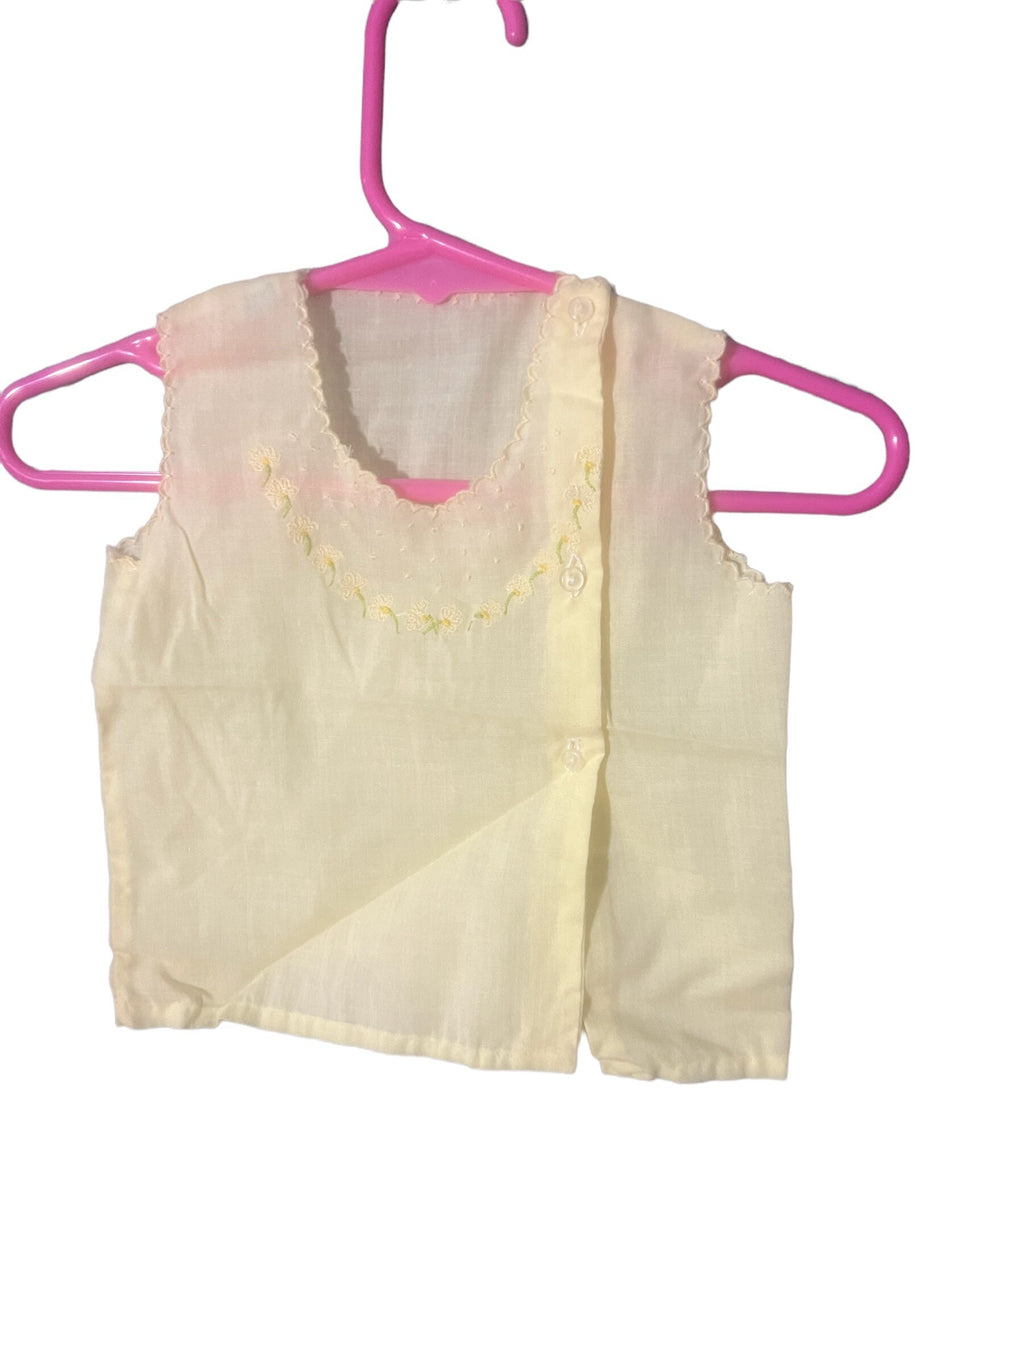 Vintage embroidered yellow baby diaper shirt